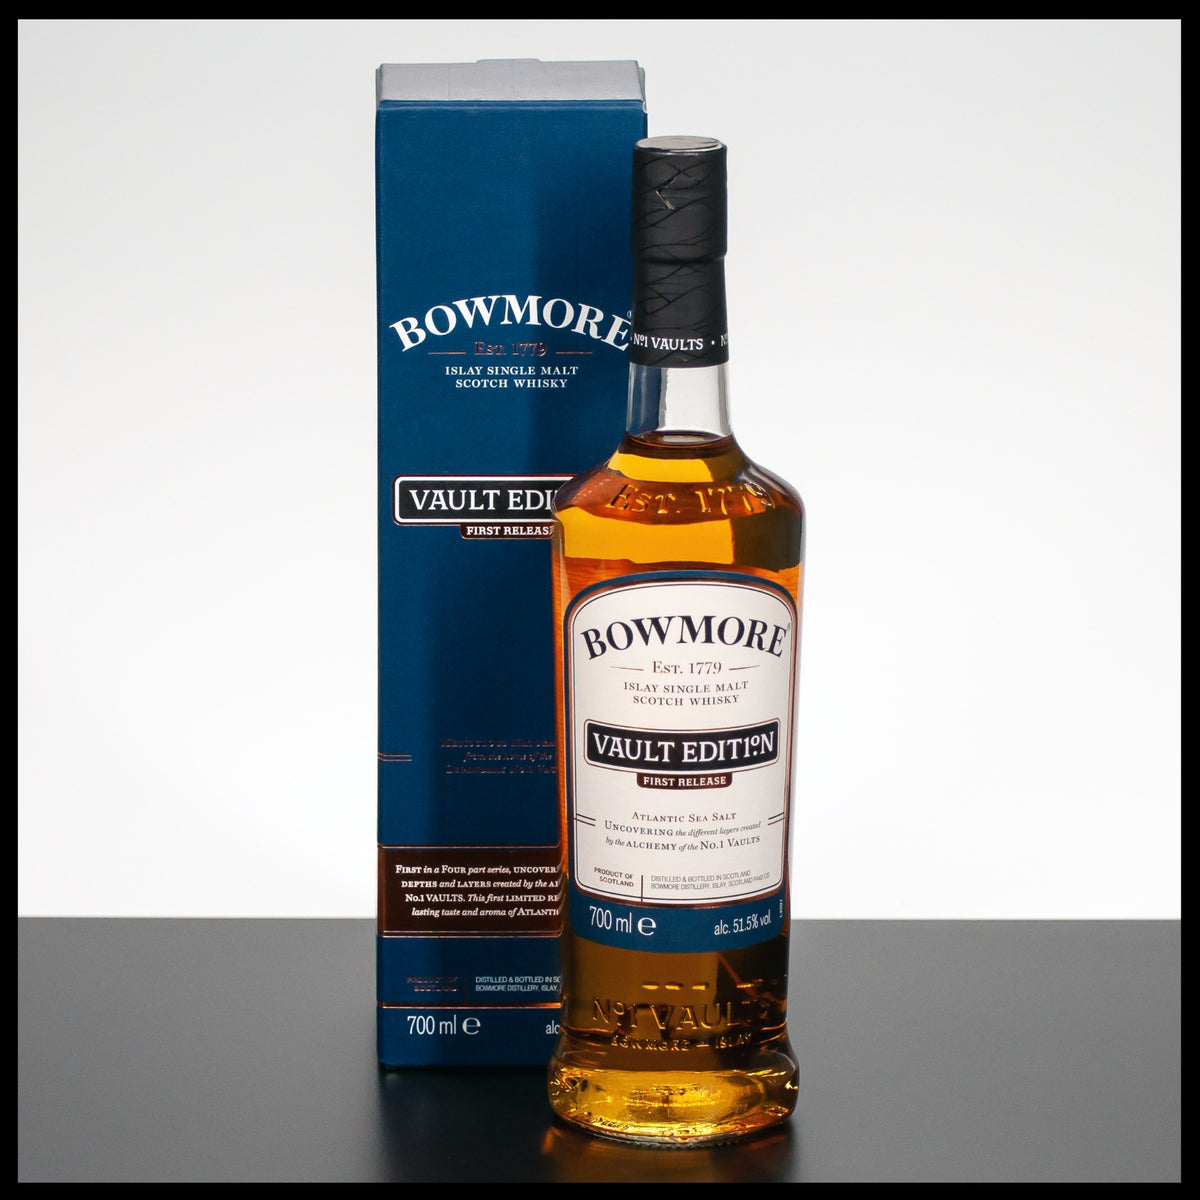 Bowmore Vault Edition First Release 0,7L - 51,5% - Trinklusiv